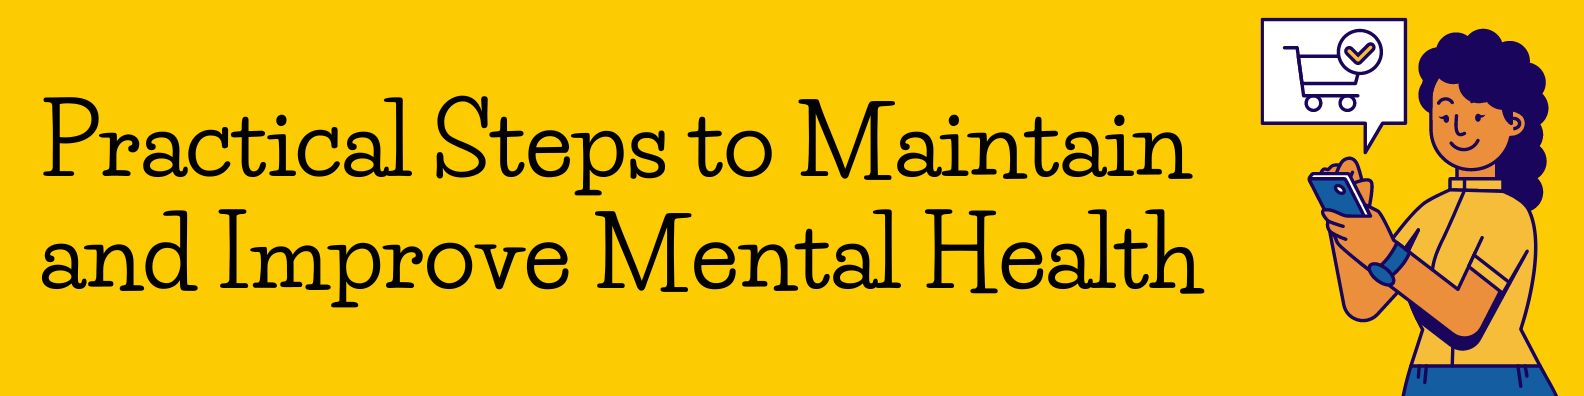 Practical Steps to Maintain and Improve Mental Health